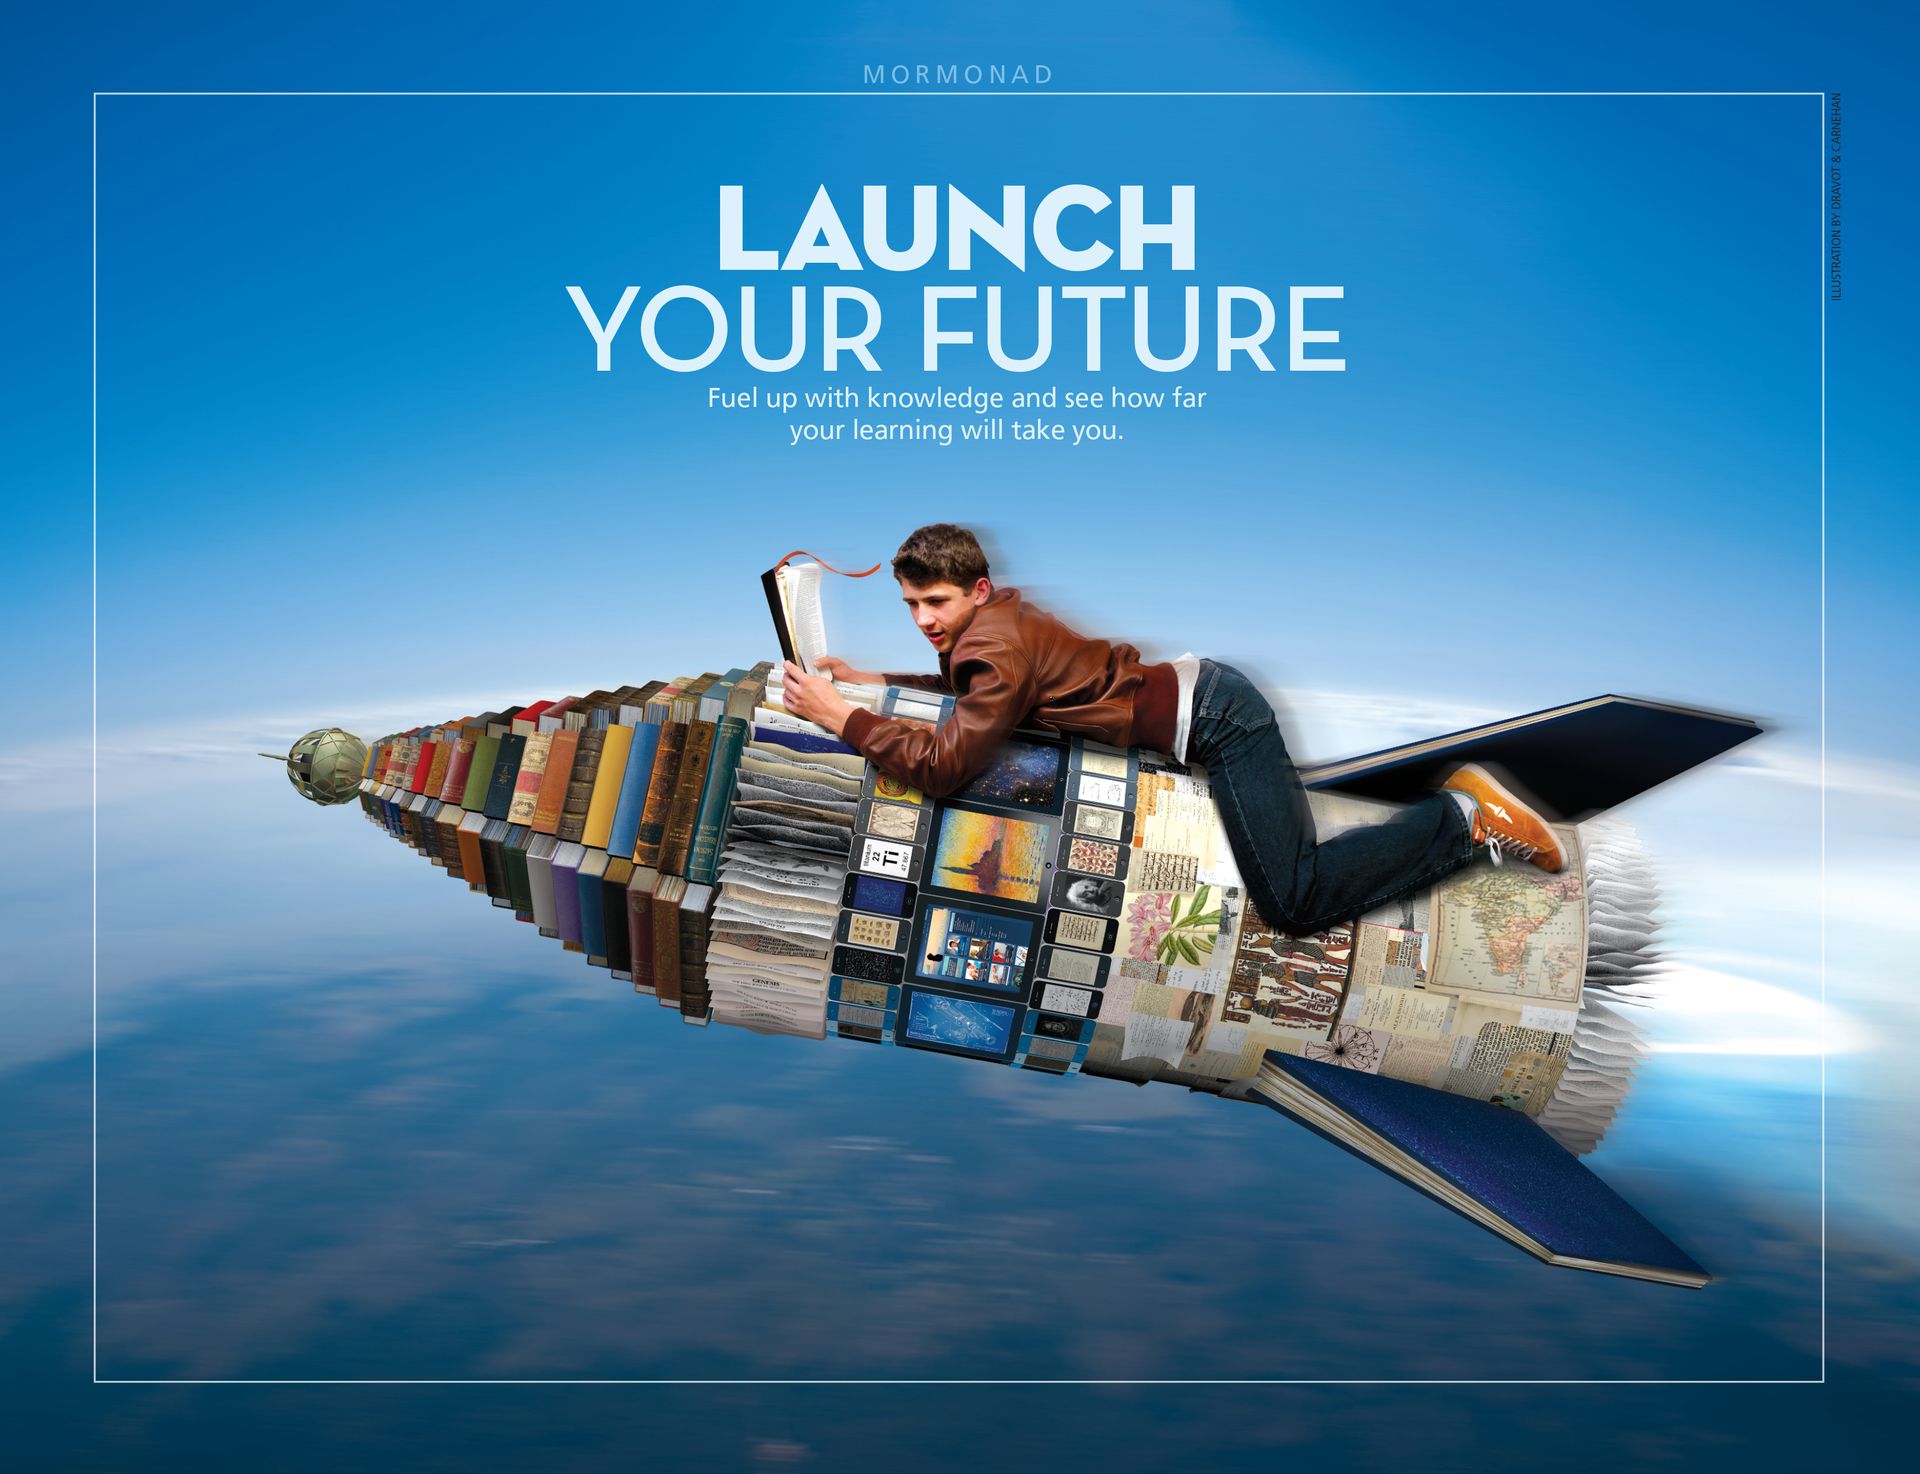 Launch Your Future. Fuel up with knowledge and see how far your learning will take you. Sept. 2013